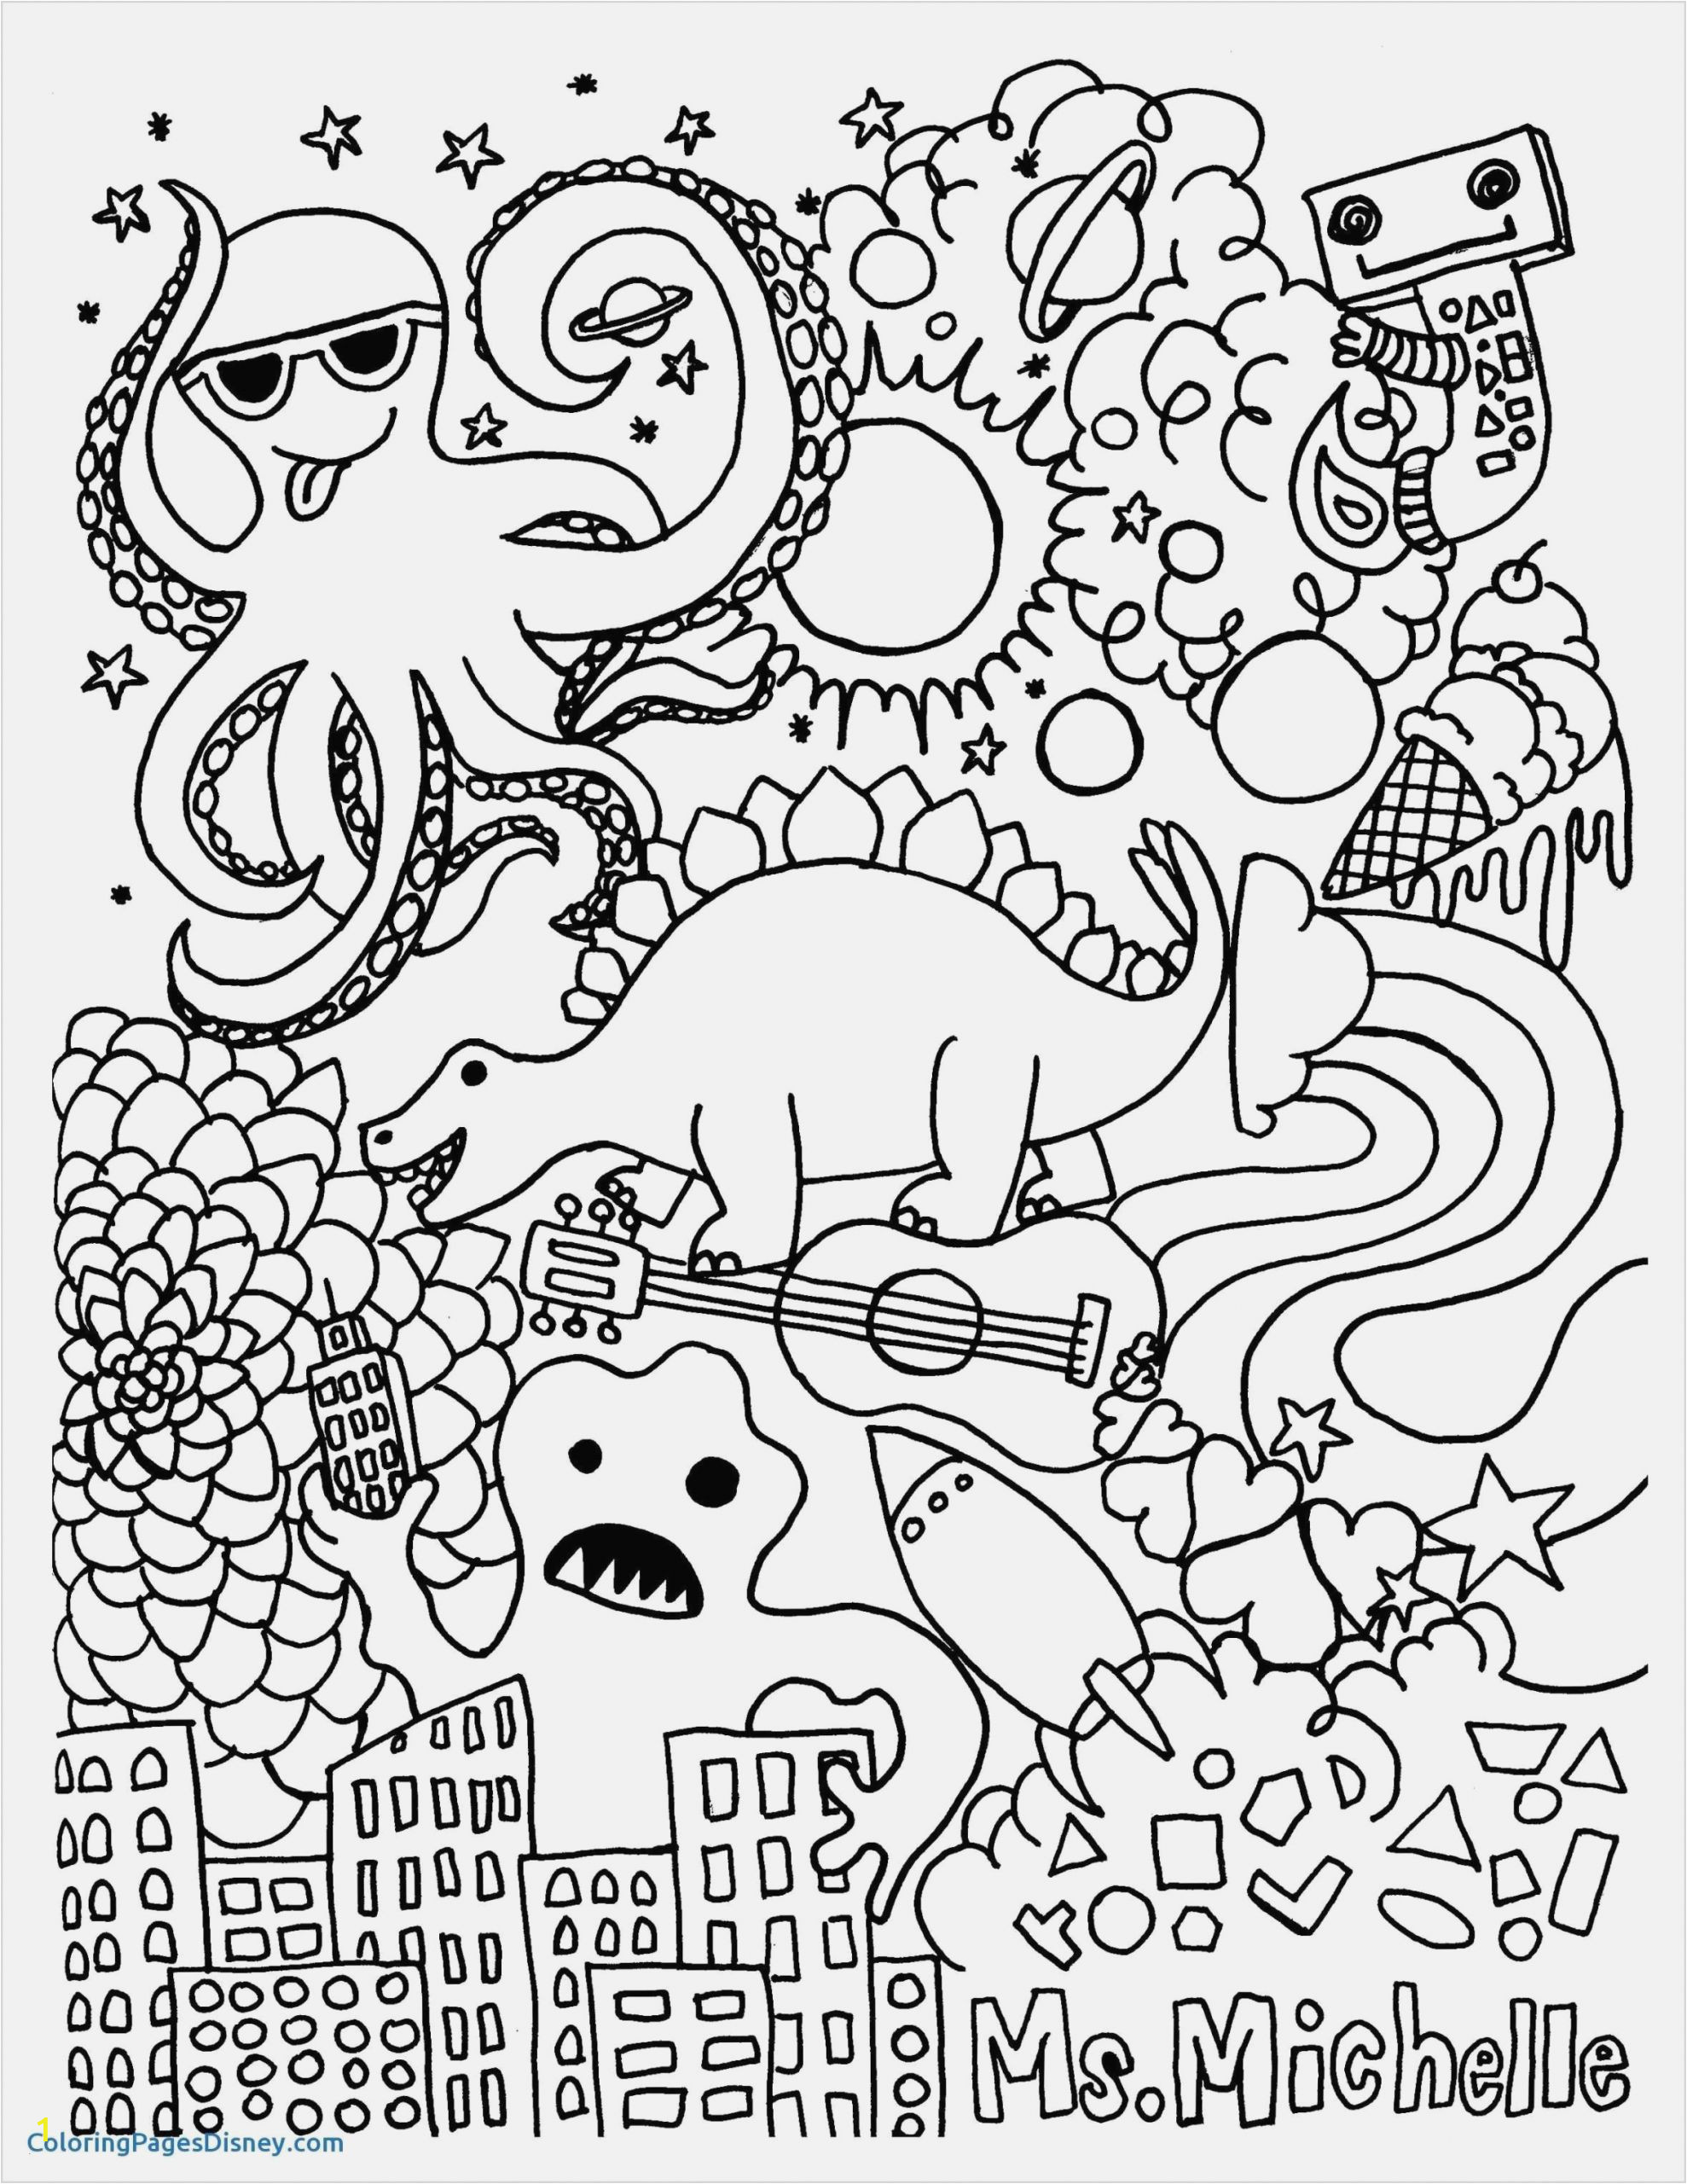 Easy Printable Halloween Coloring Pages Merry Christmas Printable Coloring Pages at Coloring Pages